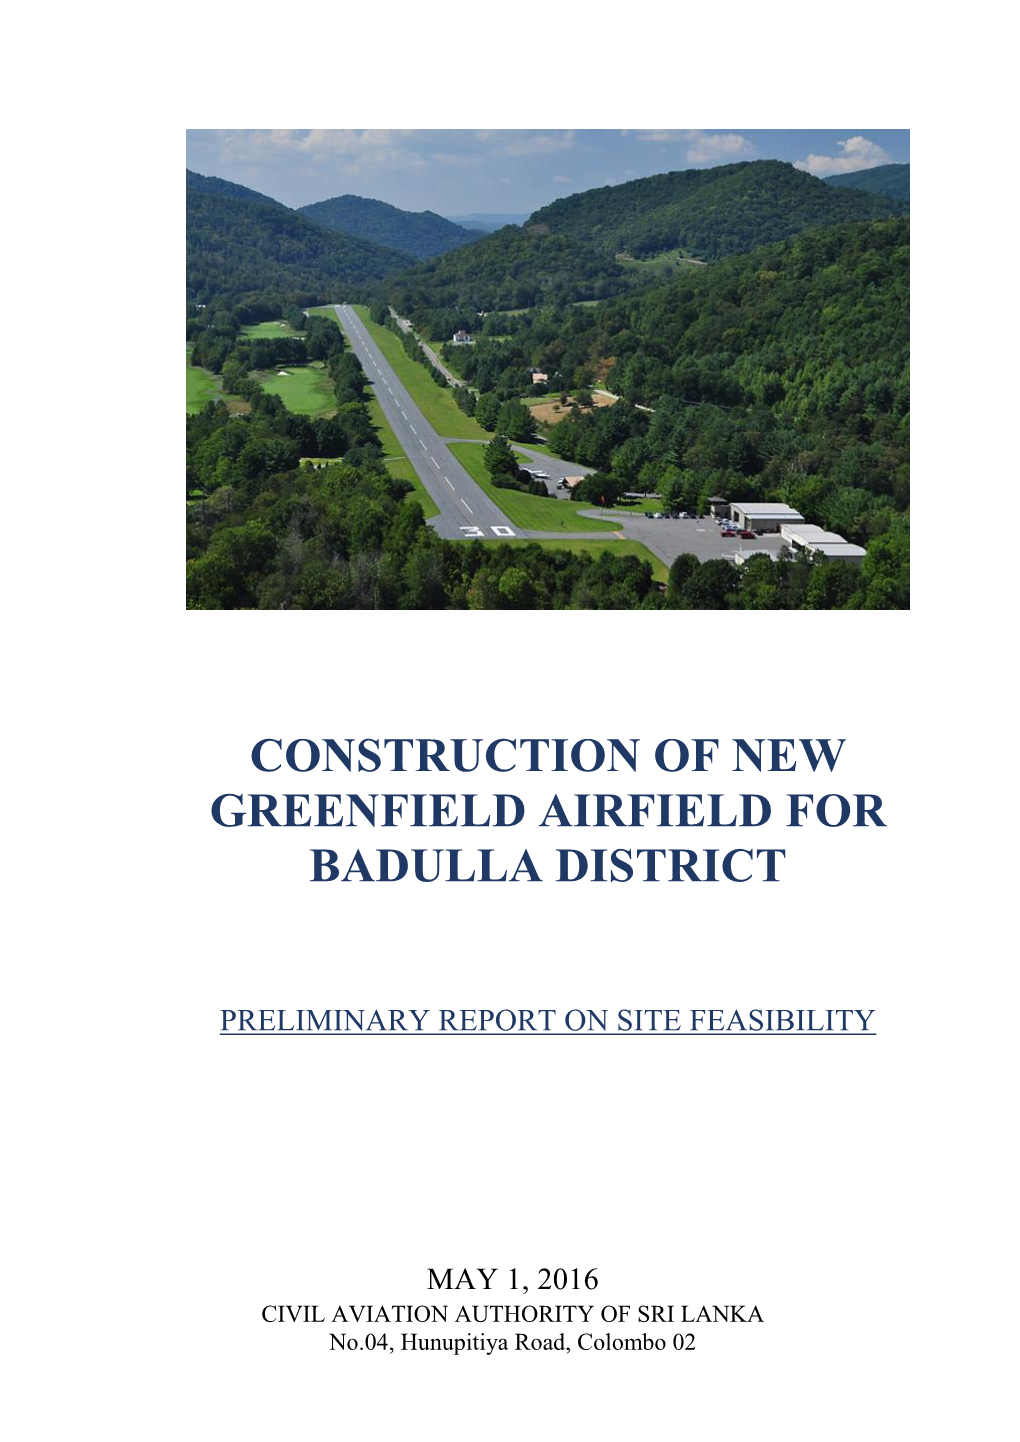 Domestic Airport in Badulla District, a Proposal Was Received to Consider a Land at Sherwood Estate, Thotalagala in Haputale